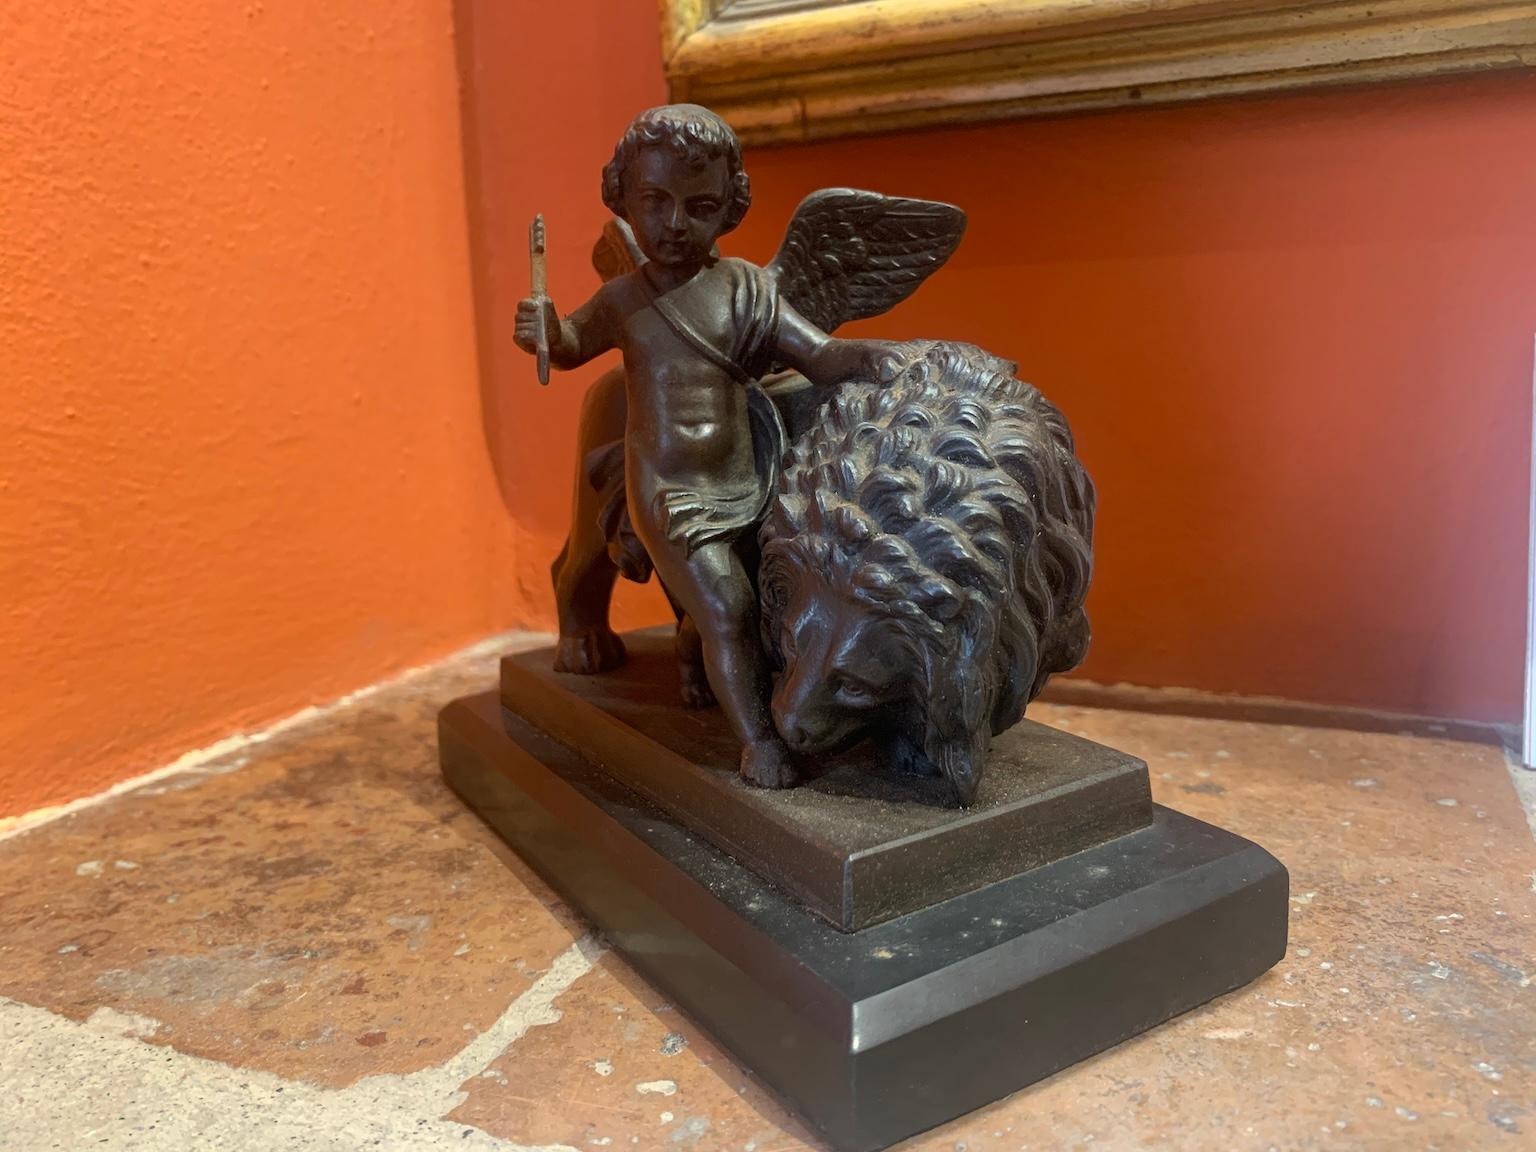 Marble-based bronze statuette depicting Cupid, holding an arrow in his hand, walking caressing a lion's mane, lowered in the act of affectionately licking his little foot. The subject is an allegory of love conquering all, dominating and defeating